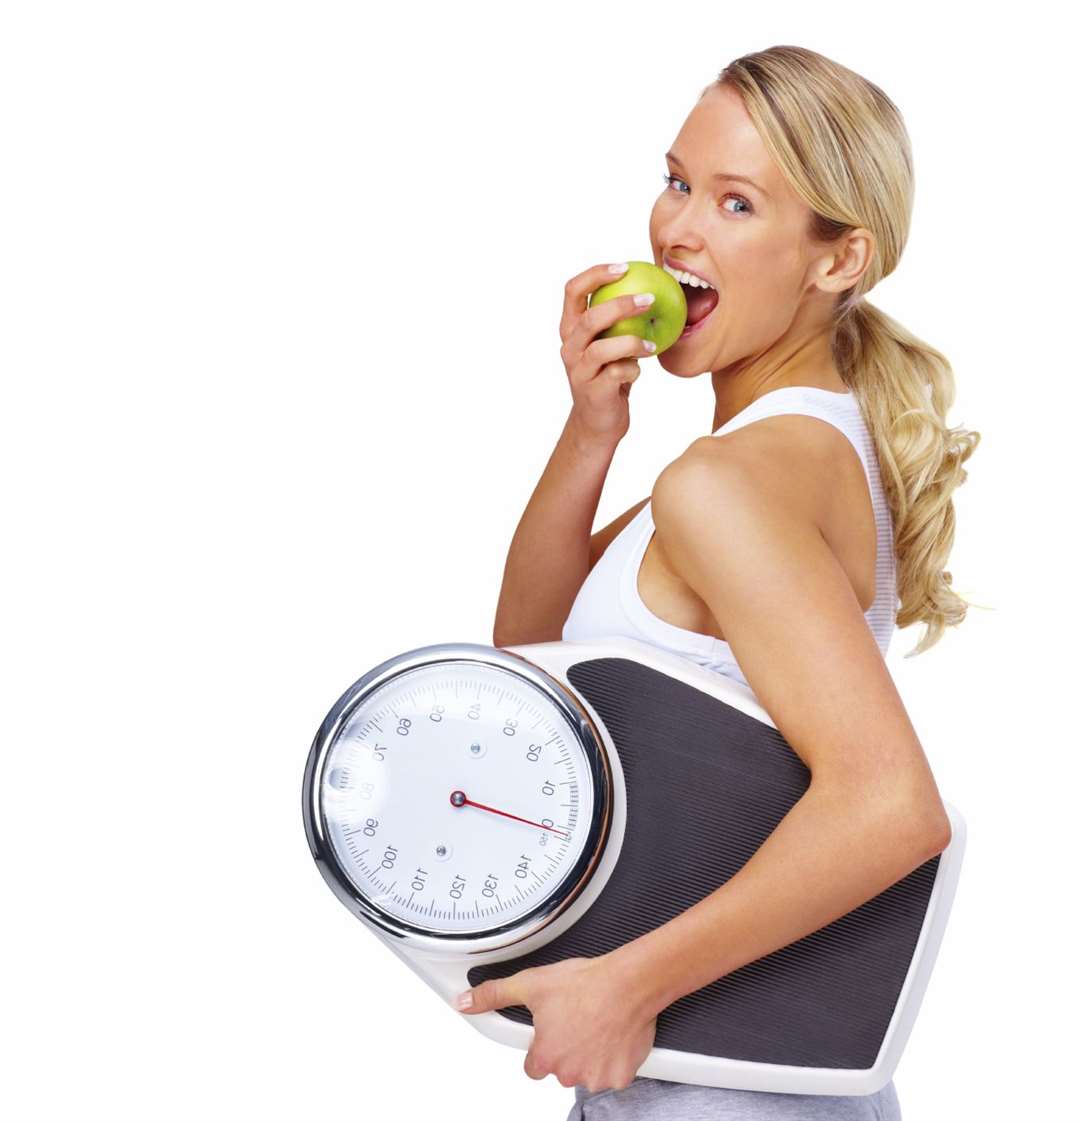 There are healthy ways to lose weight gradually.